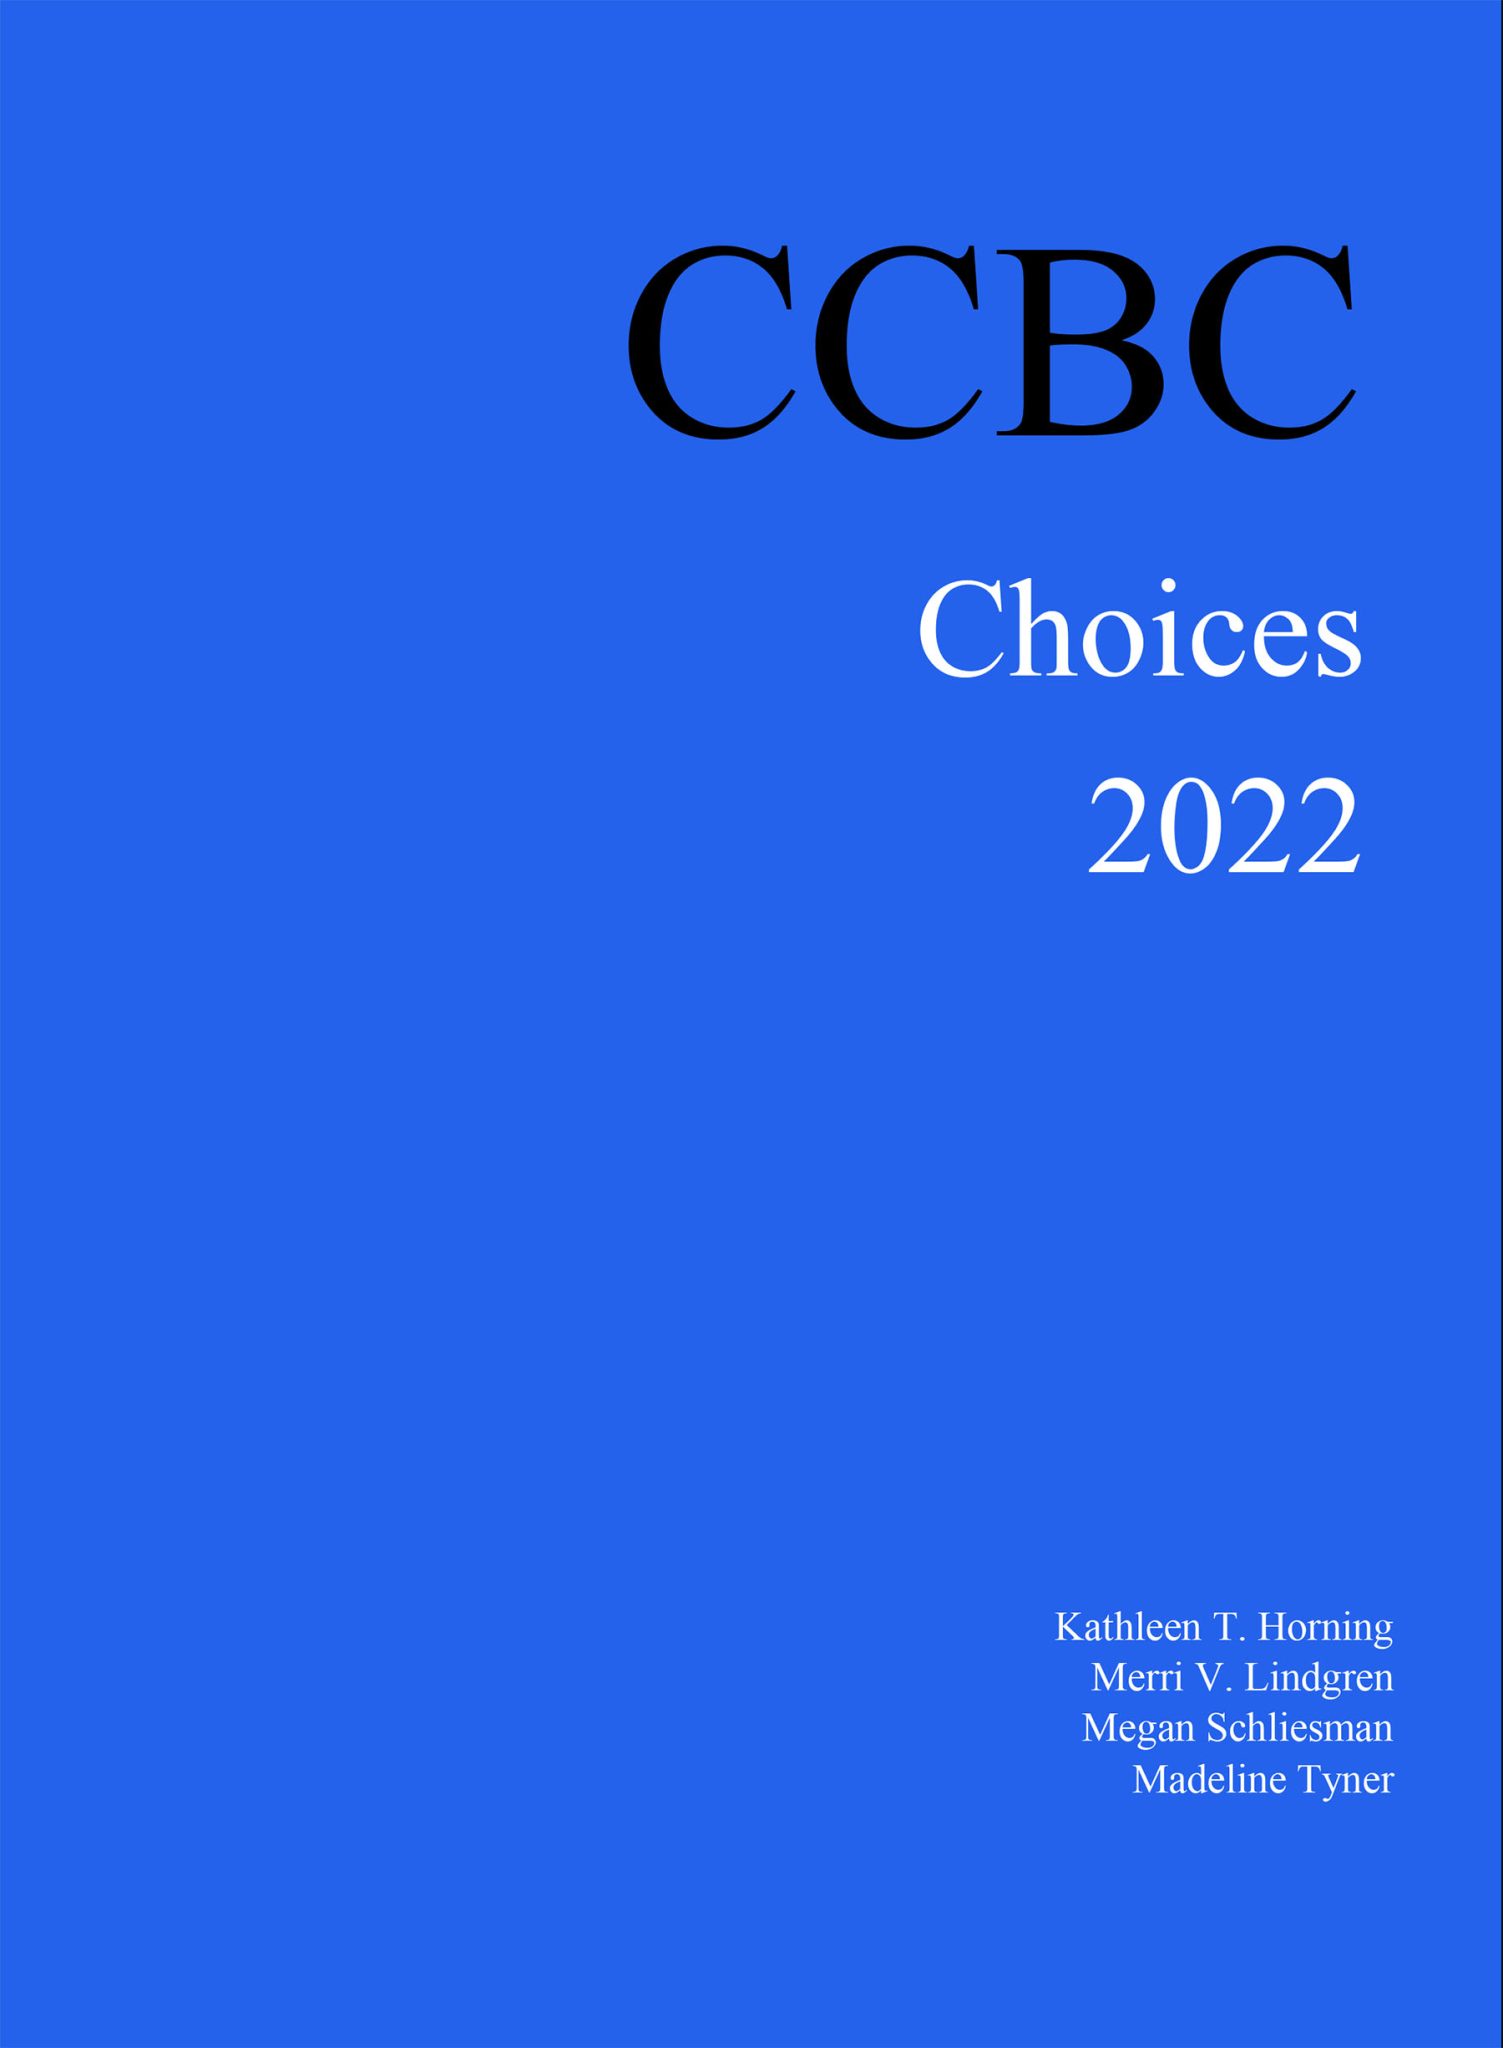 CCBC Choices 2022 Now Available Cooperative Children's Book Center